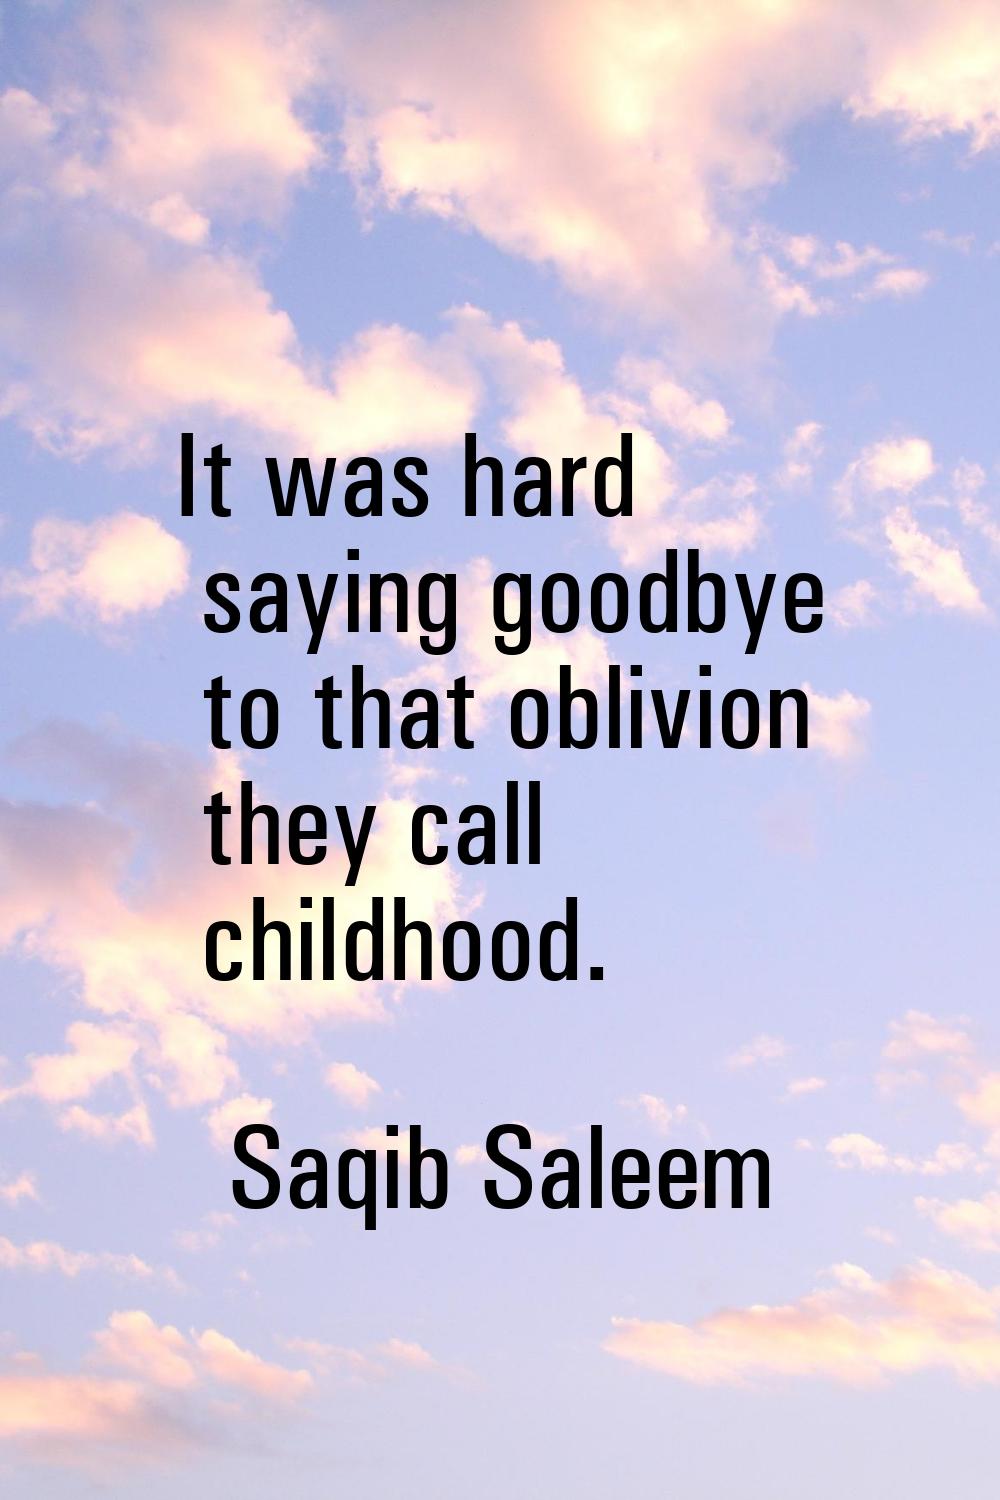 It was hard saying goodbye to that oblivion they call childhood.